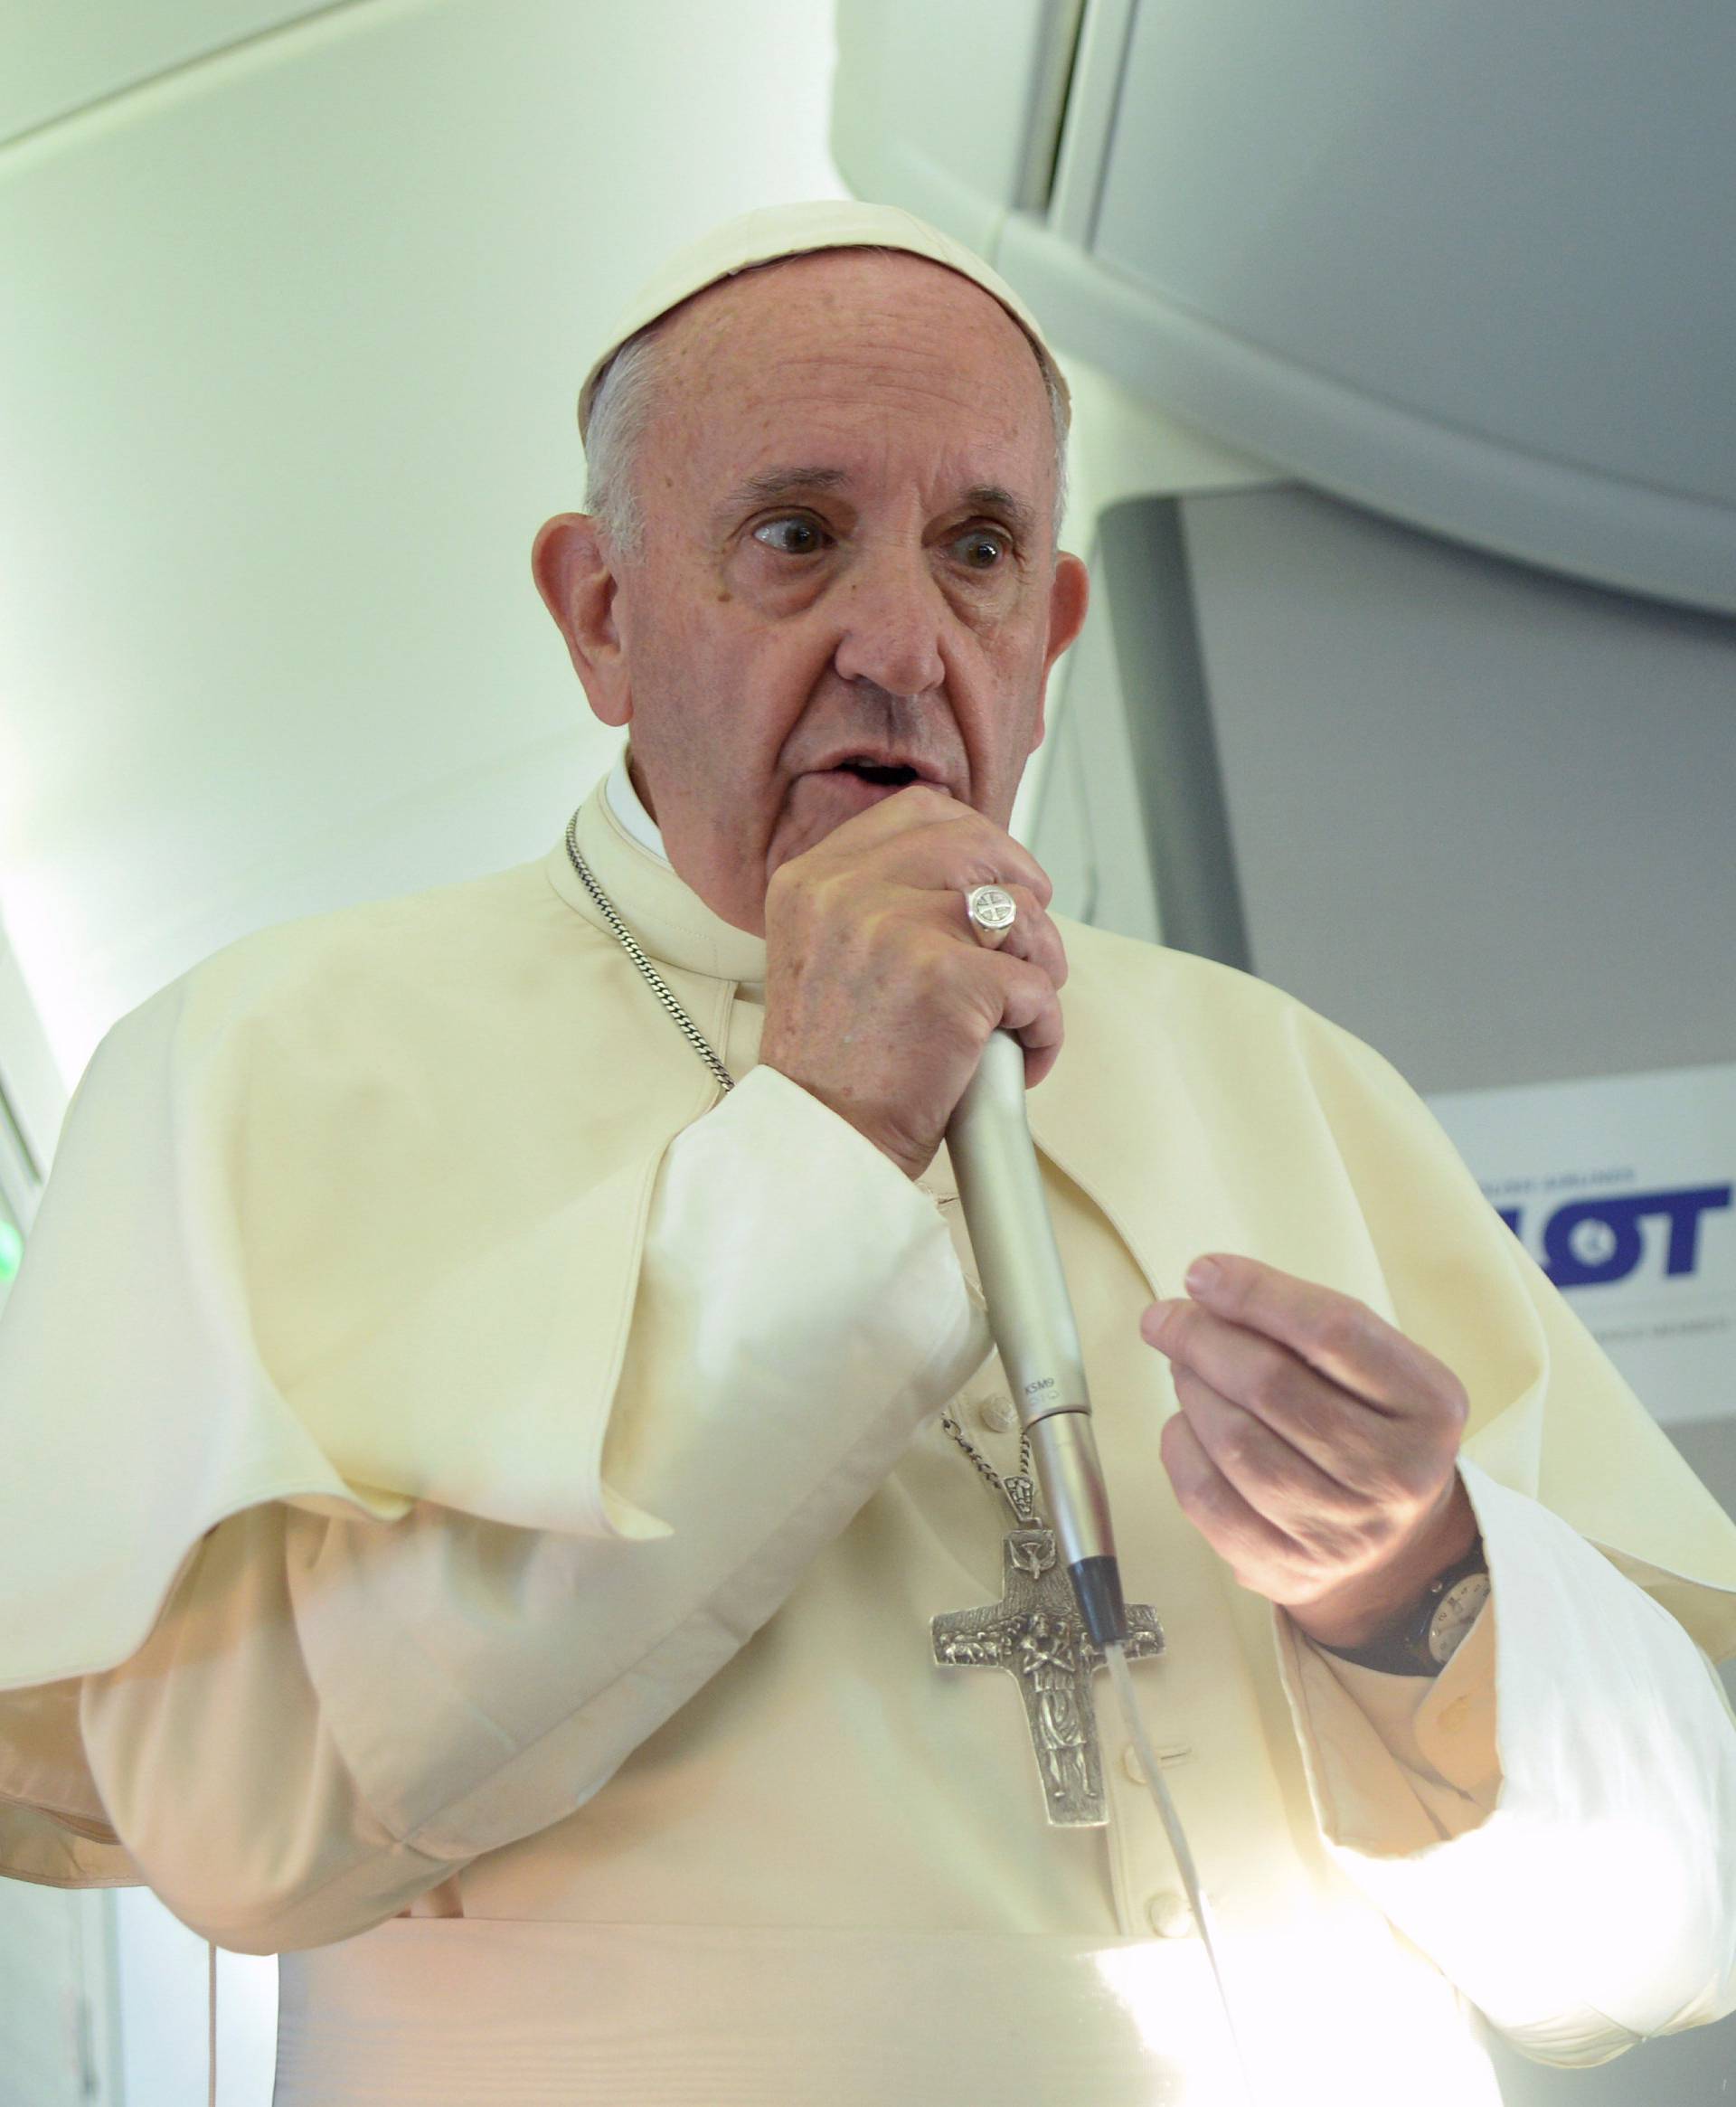 Pope Francis speaks to journalists during a press conference on the plane after his visit to Krakow for the World Youth Days 